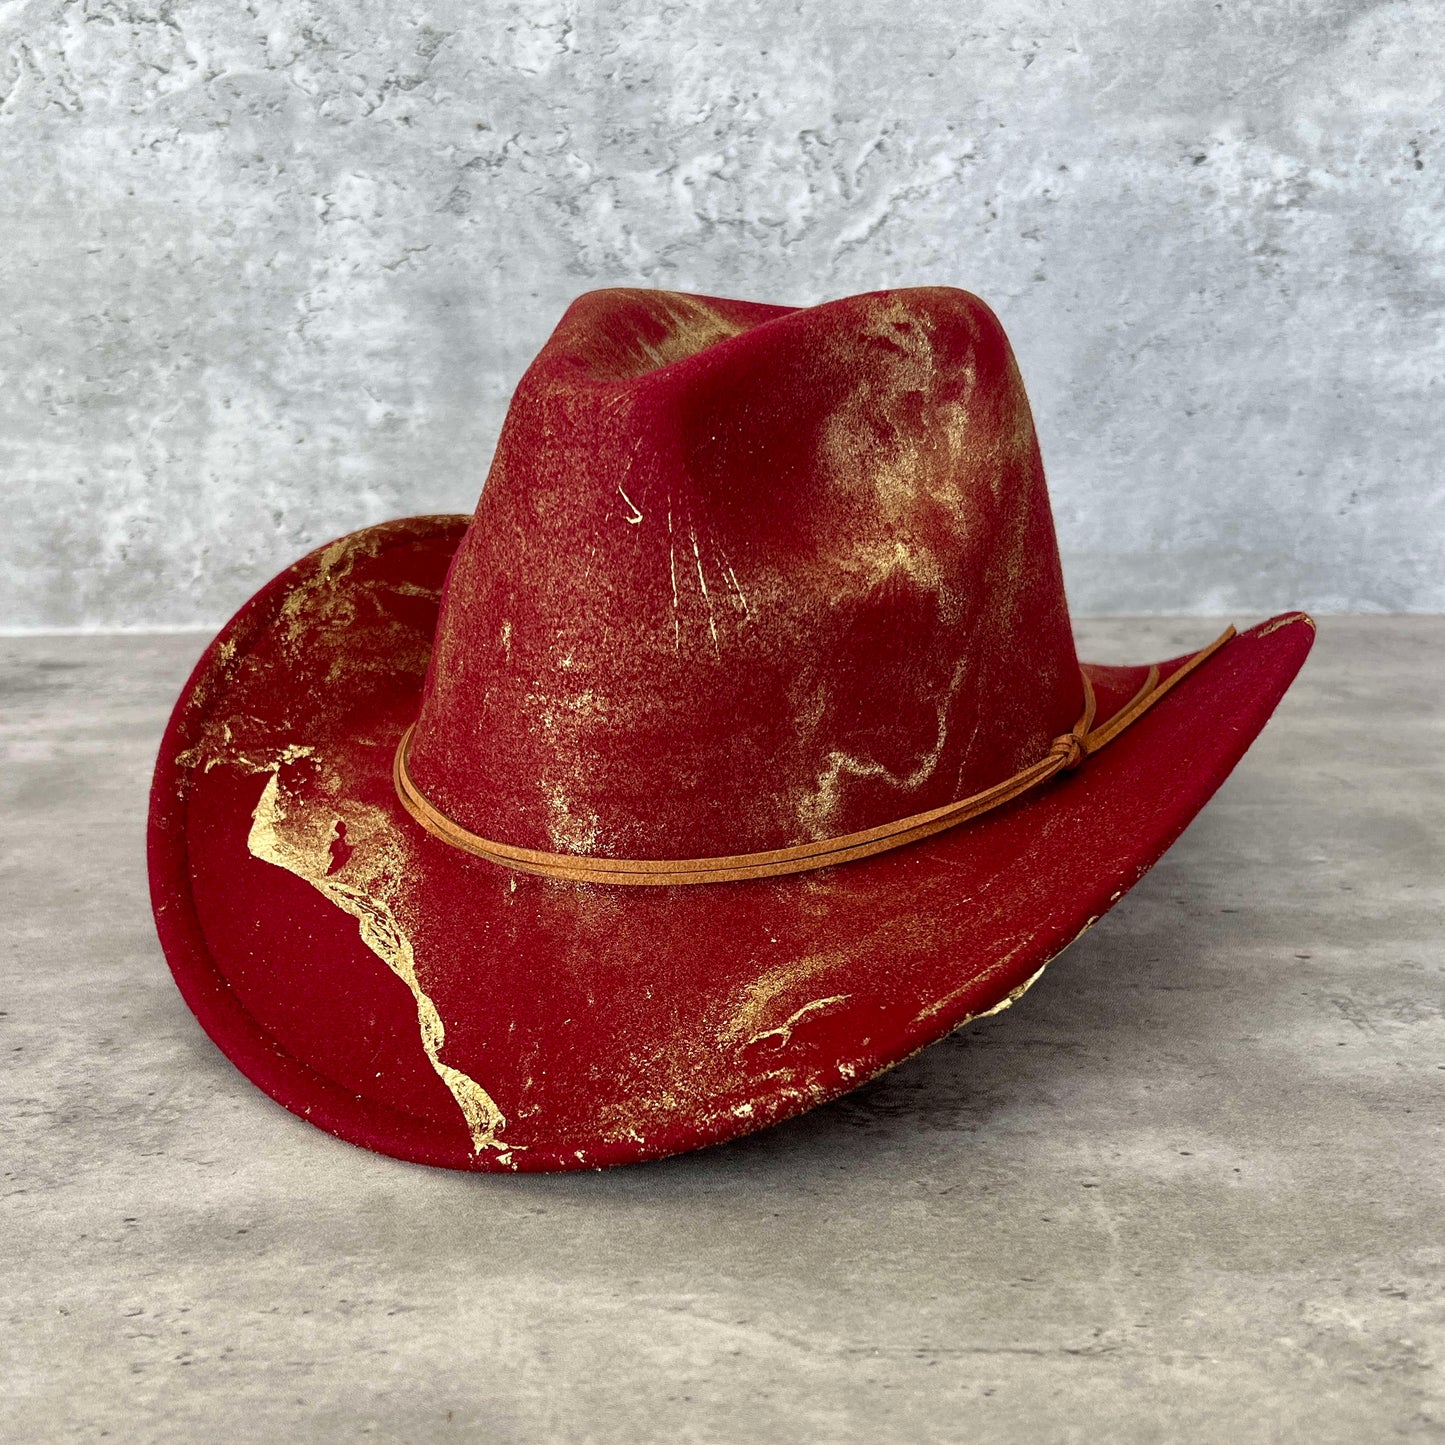 Maroon burgundy wine western cowboy hat painted with gold marbling. Has light brown faux suede cord hat band. 